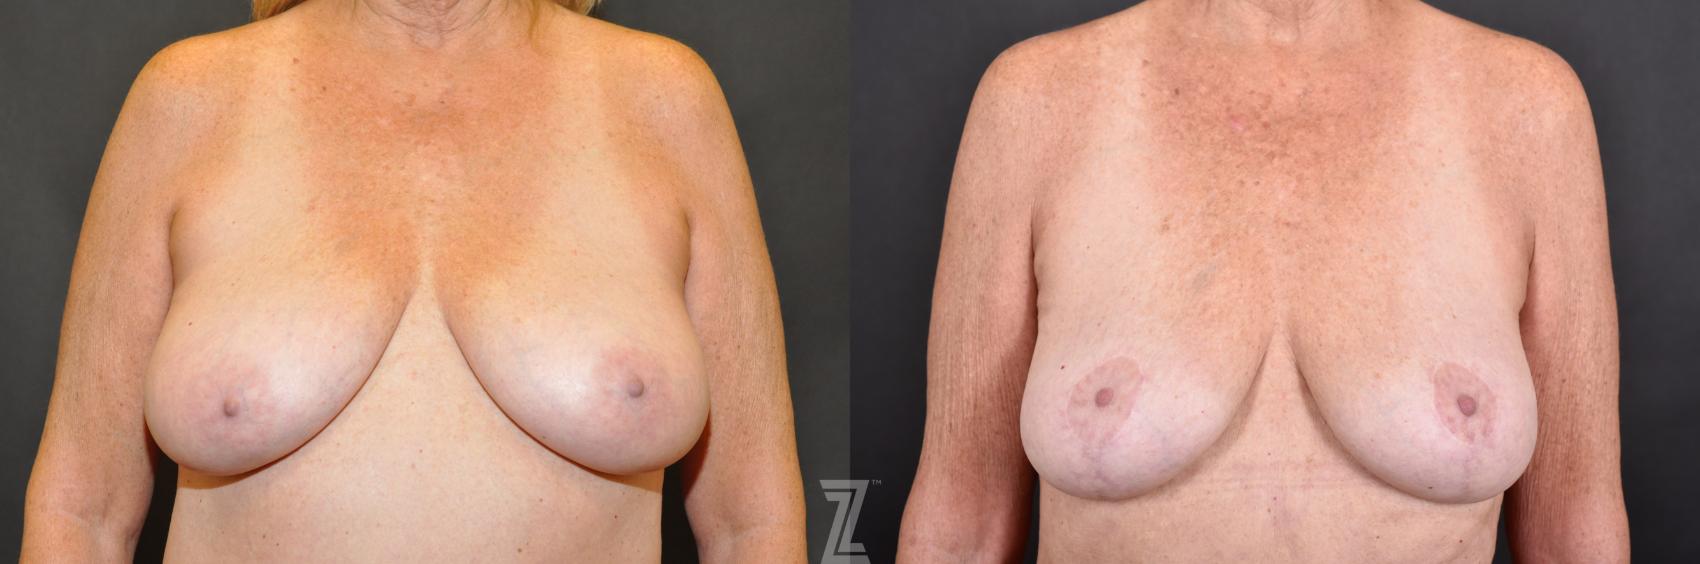 Breast Reduction Before & After Photo | Austin, TX | The Piazza Center for Plastic Surgery & Advanced Skin Care